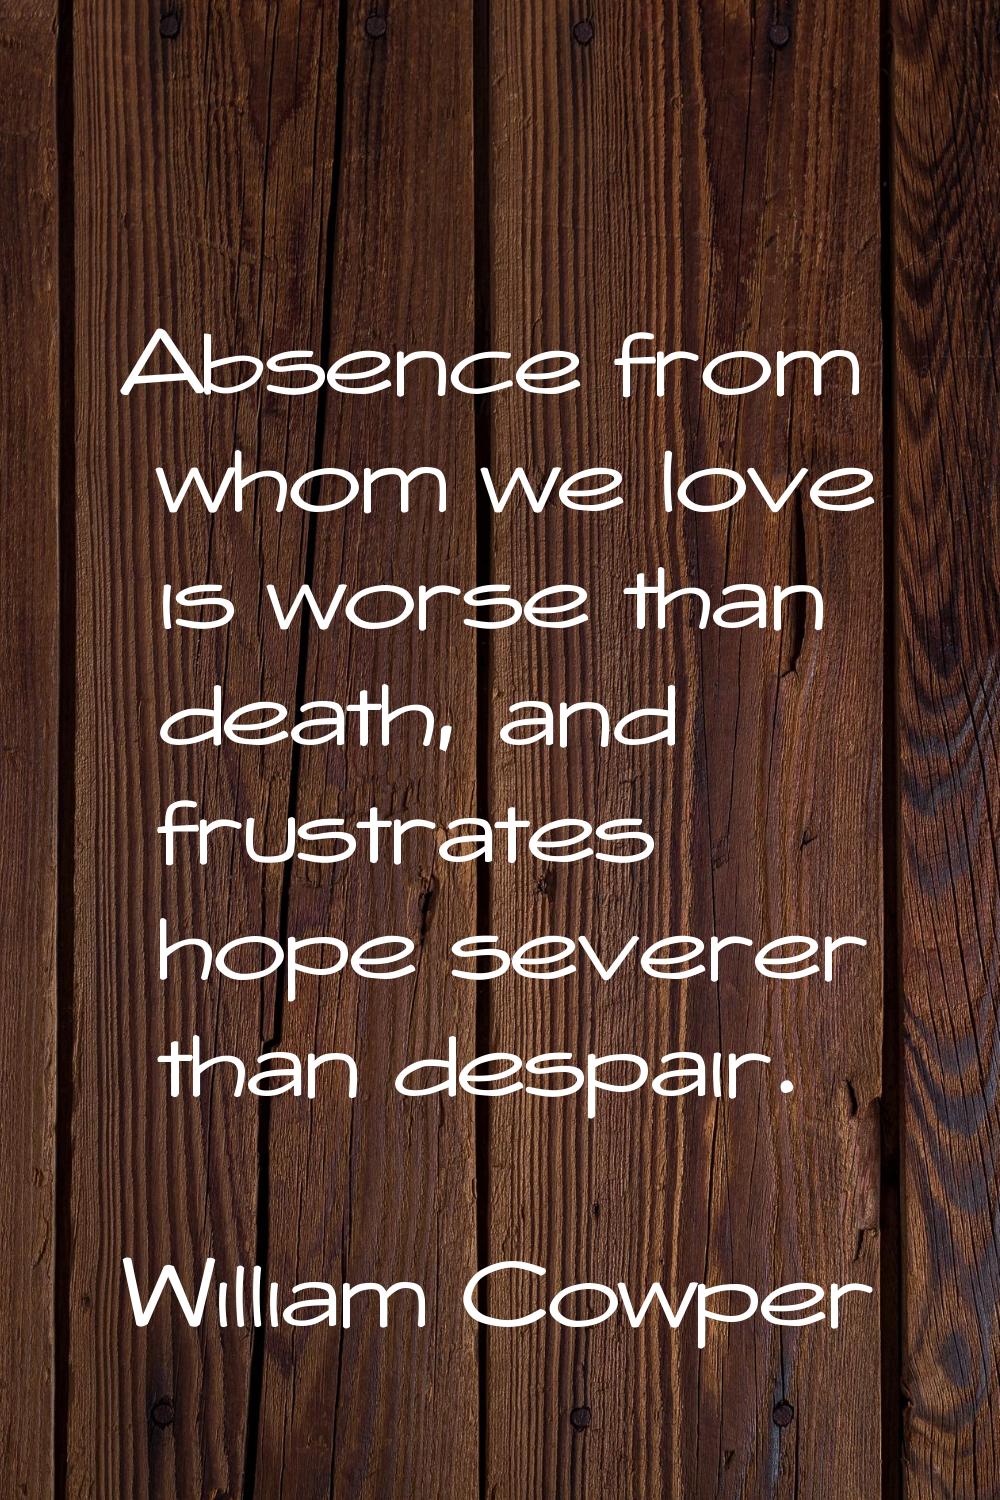 Absence from whom we love is worse than death, and frustrates hope severer than despair.